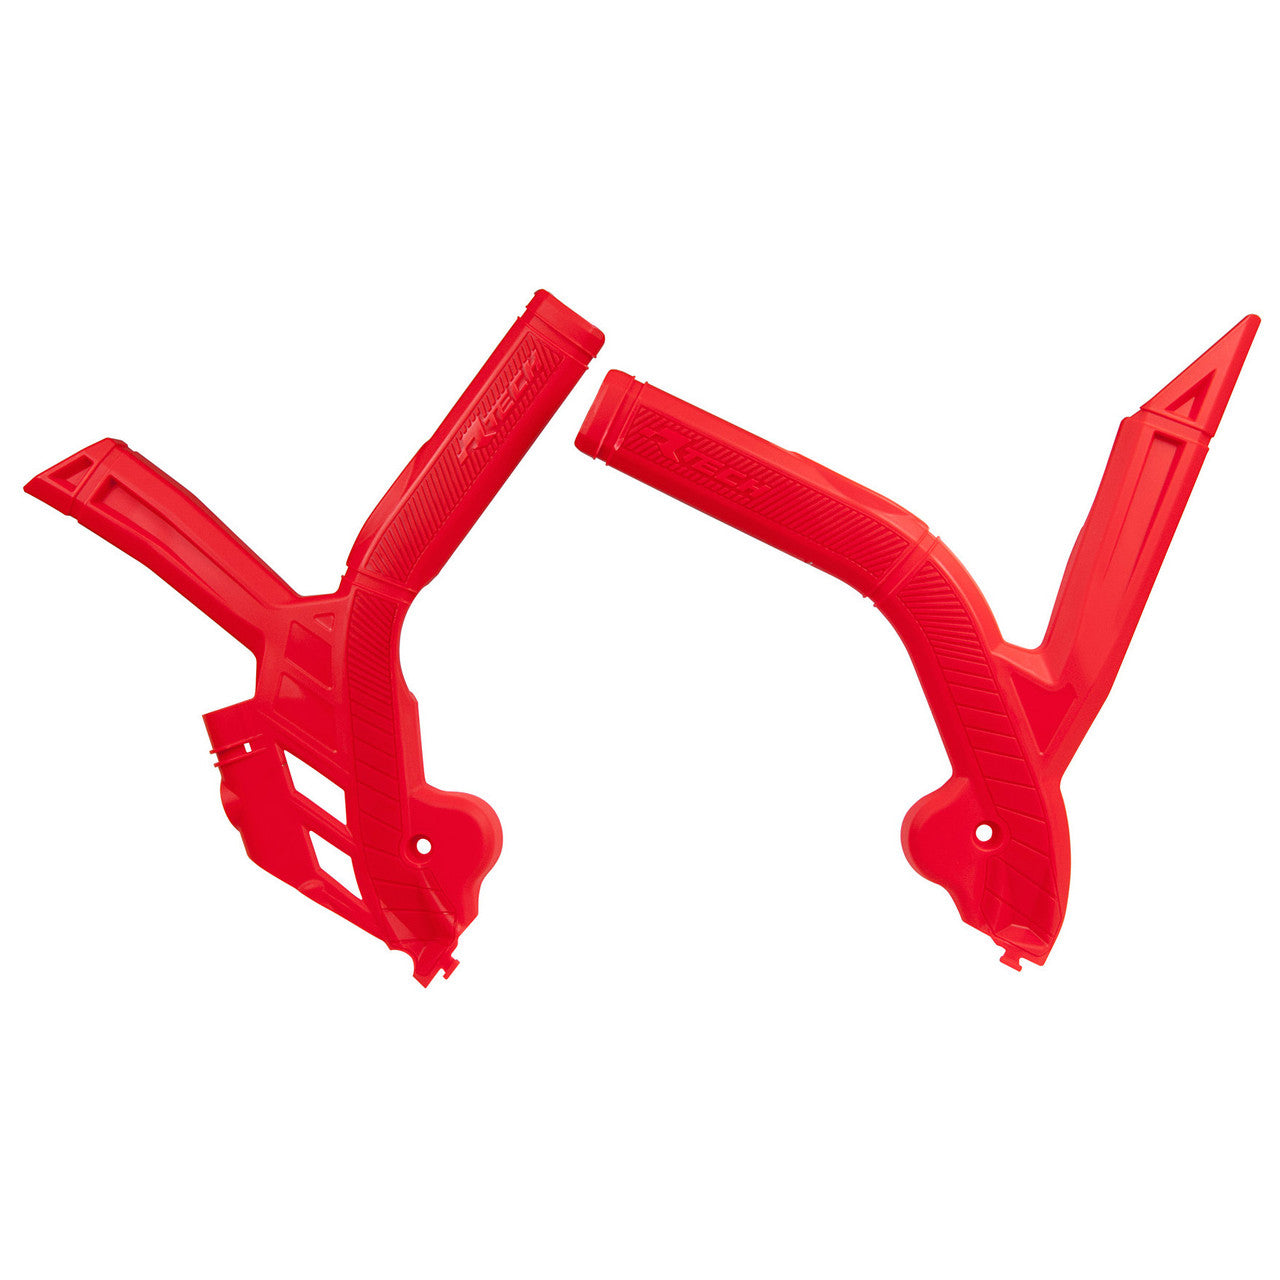 Rtech Frame Protectors Beta RR 125-480 20-21 Red